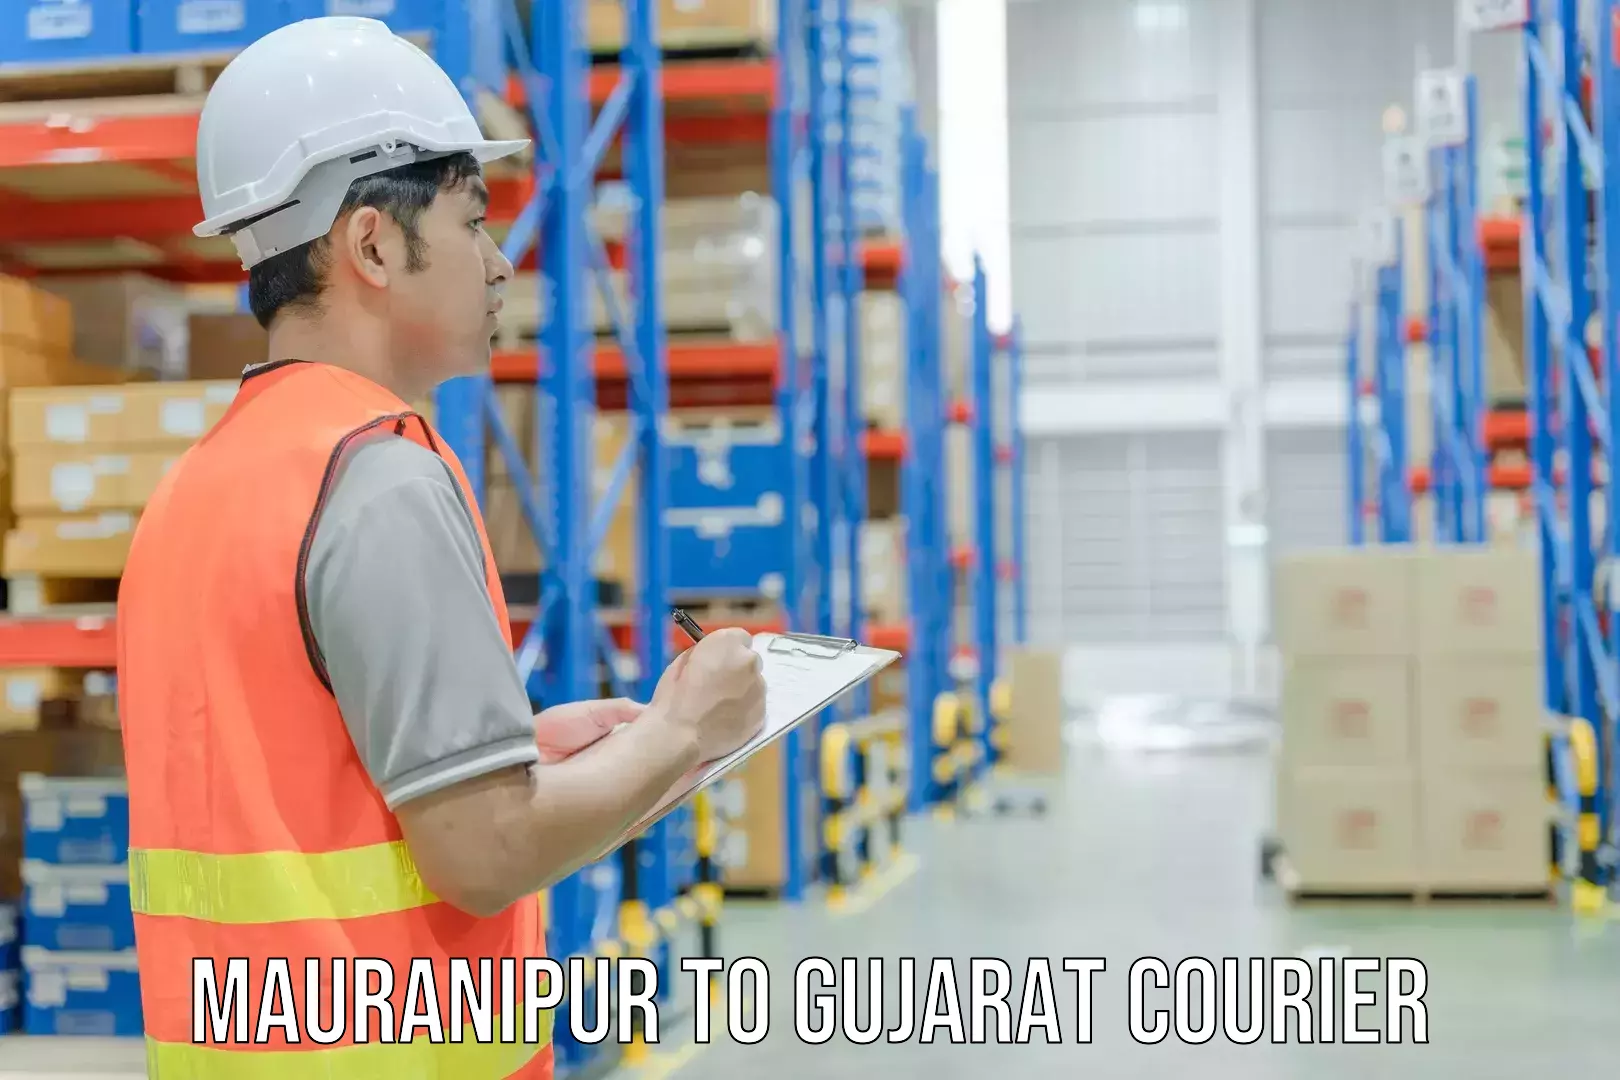 State-of-the-art courier technology Mauranipur to Gujarat